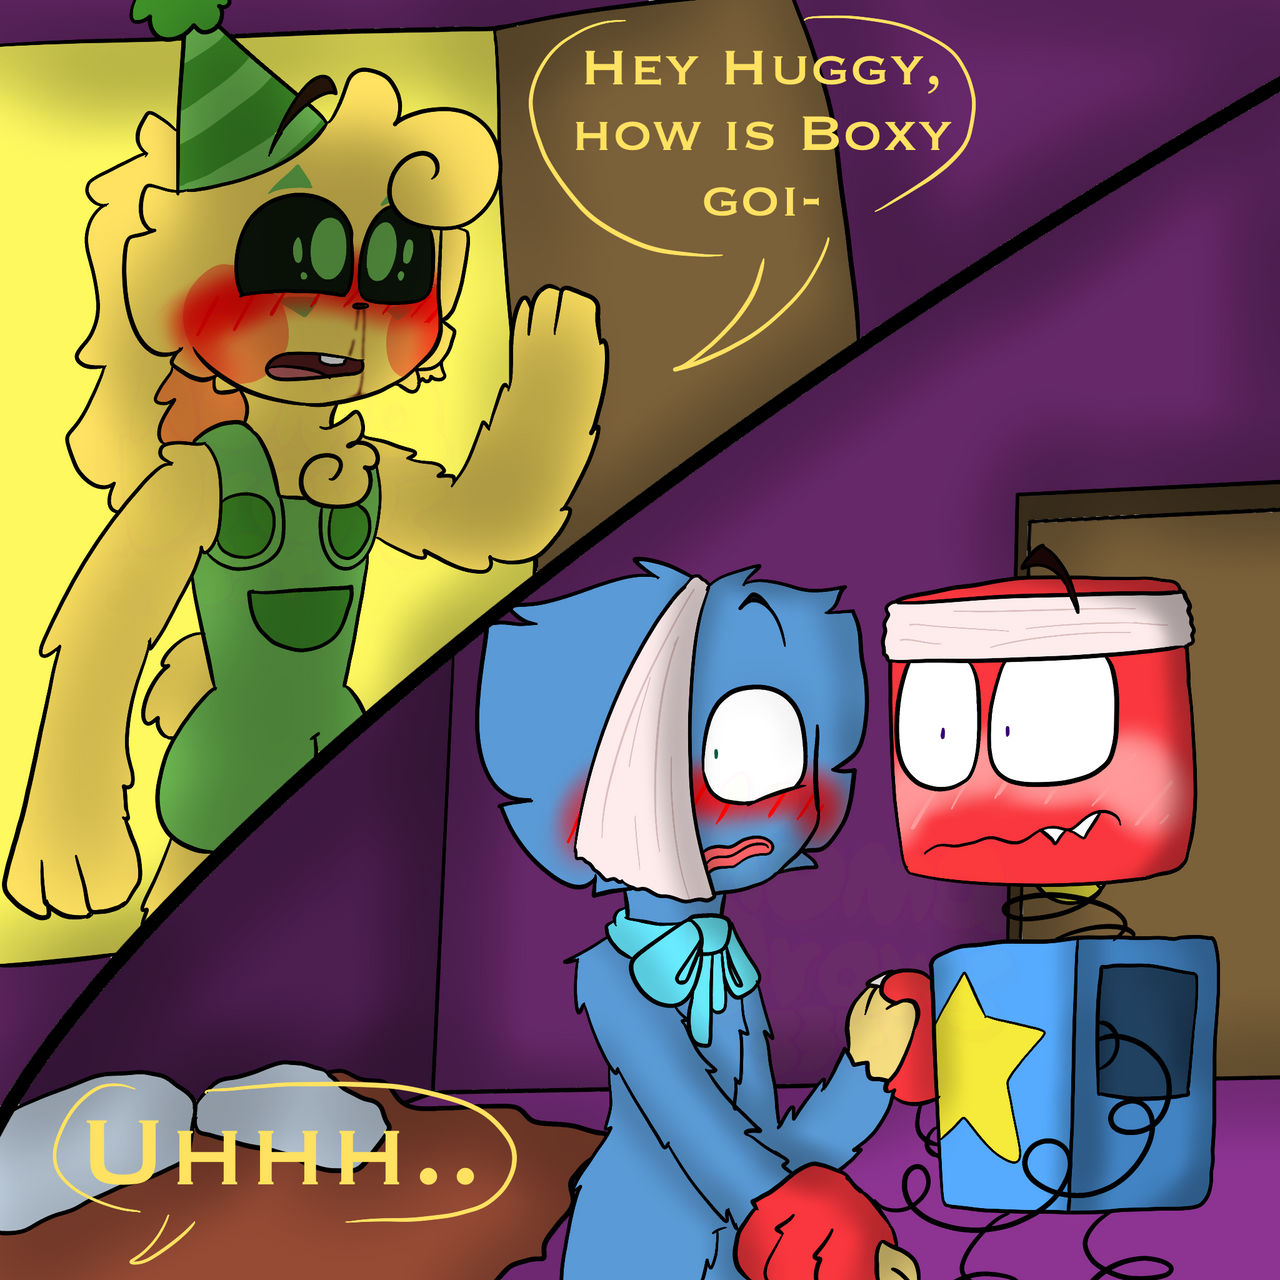 Boxy Boo, By Me by Swaggkam24 on Newgrounds